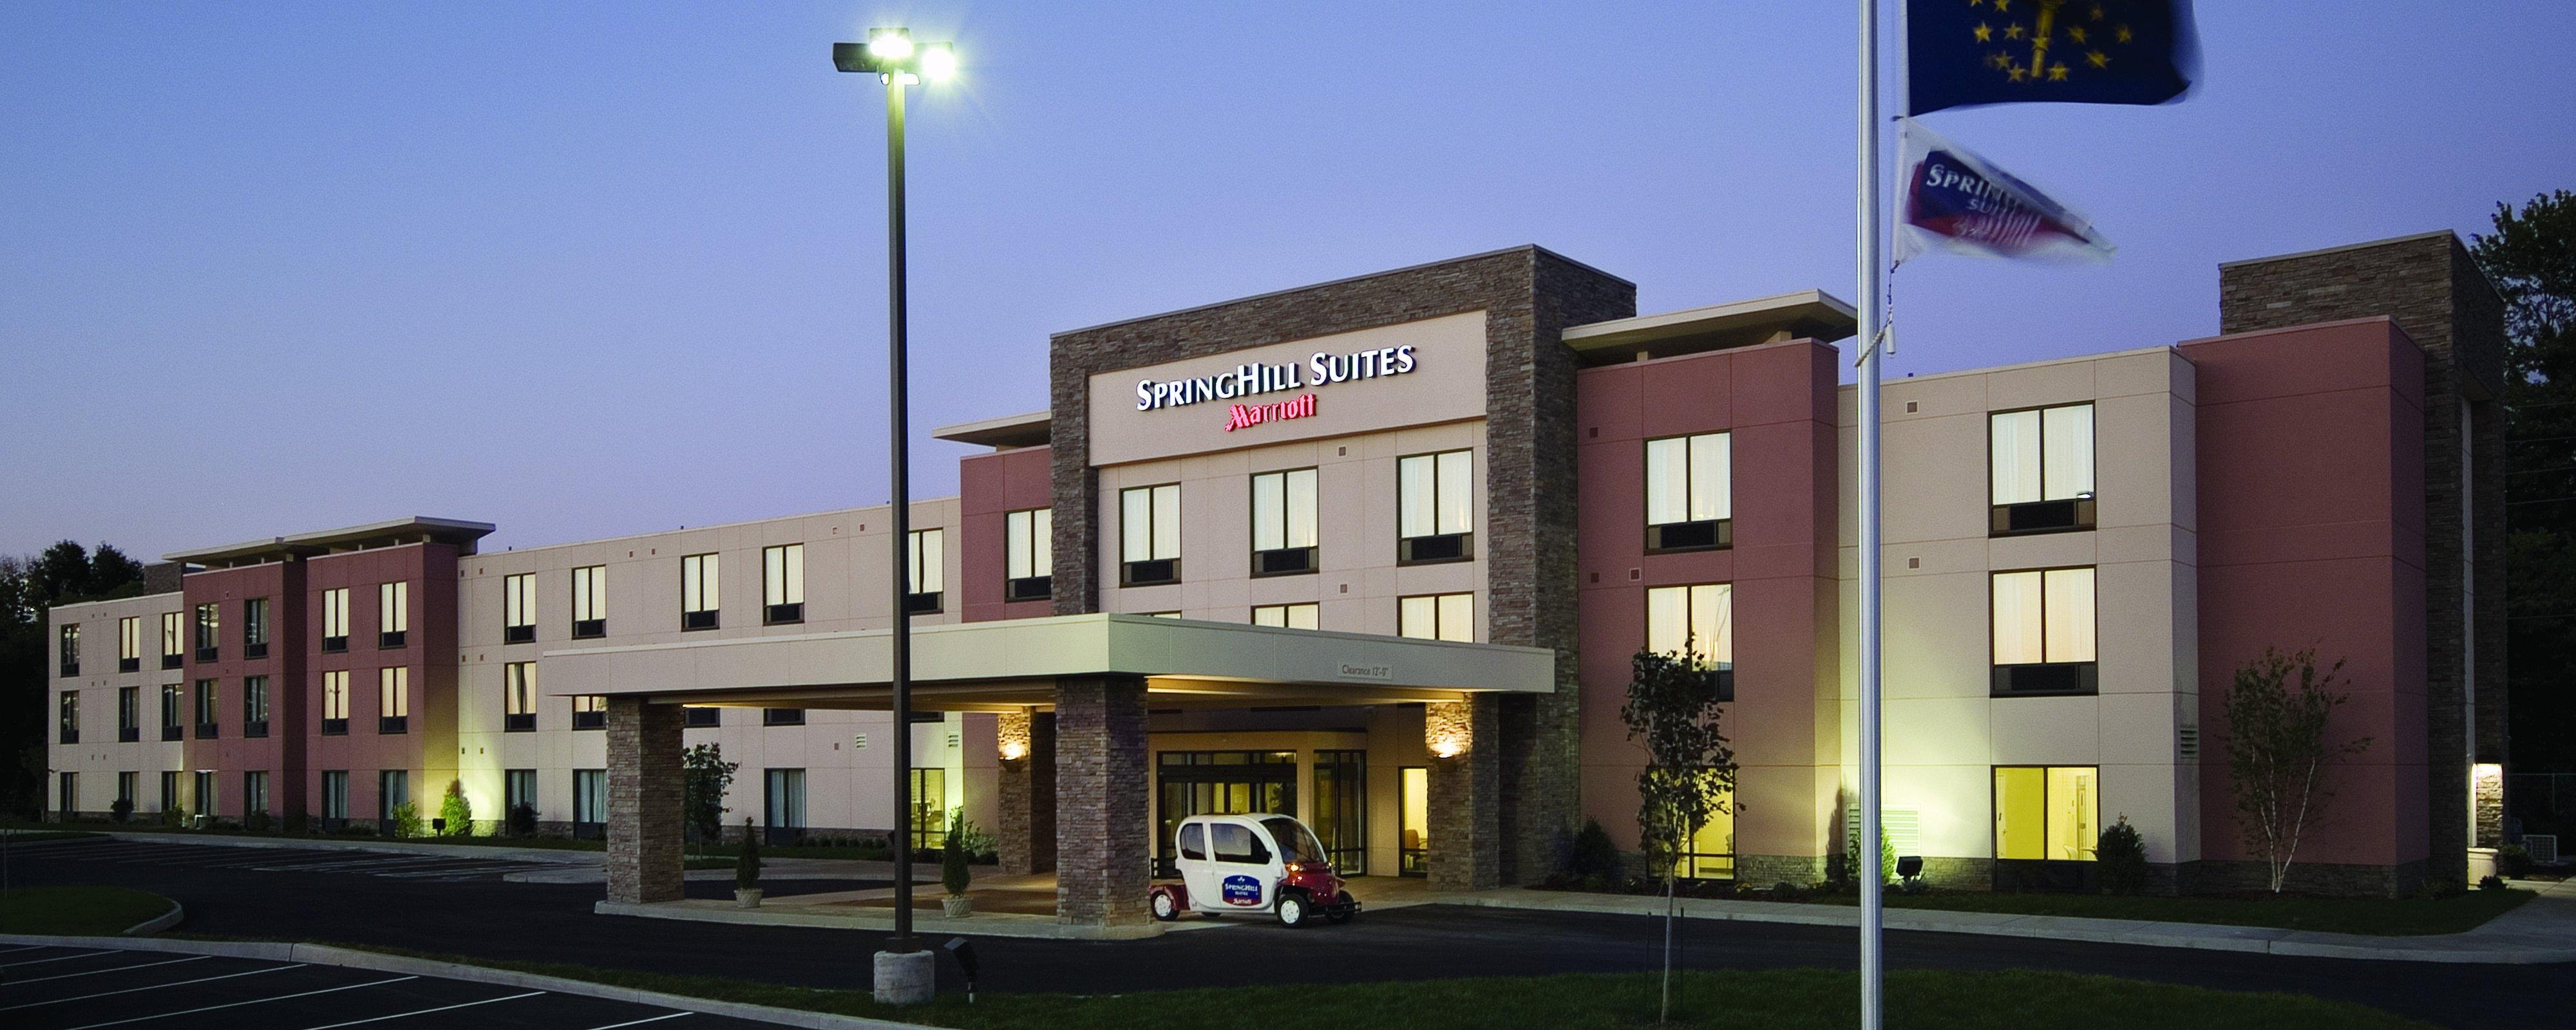 Springhill Suites Terre Haute Geraumige Hotelzimmer In Terre